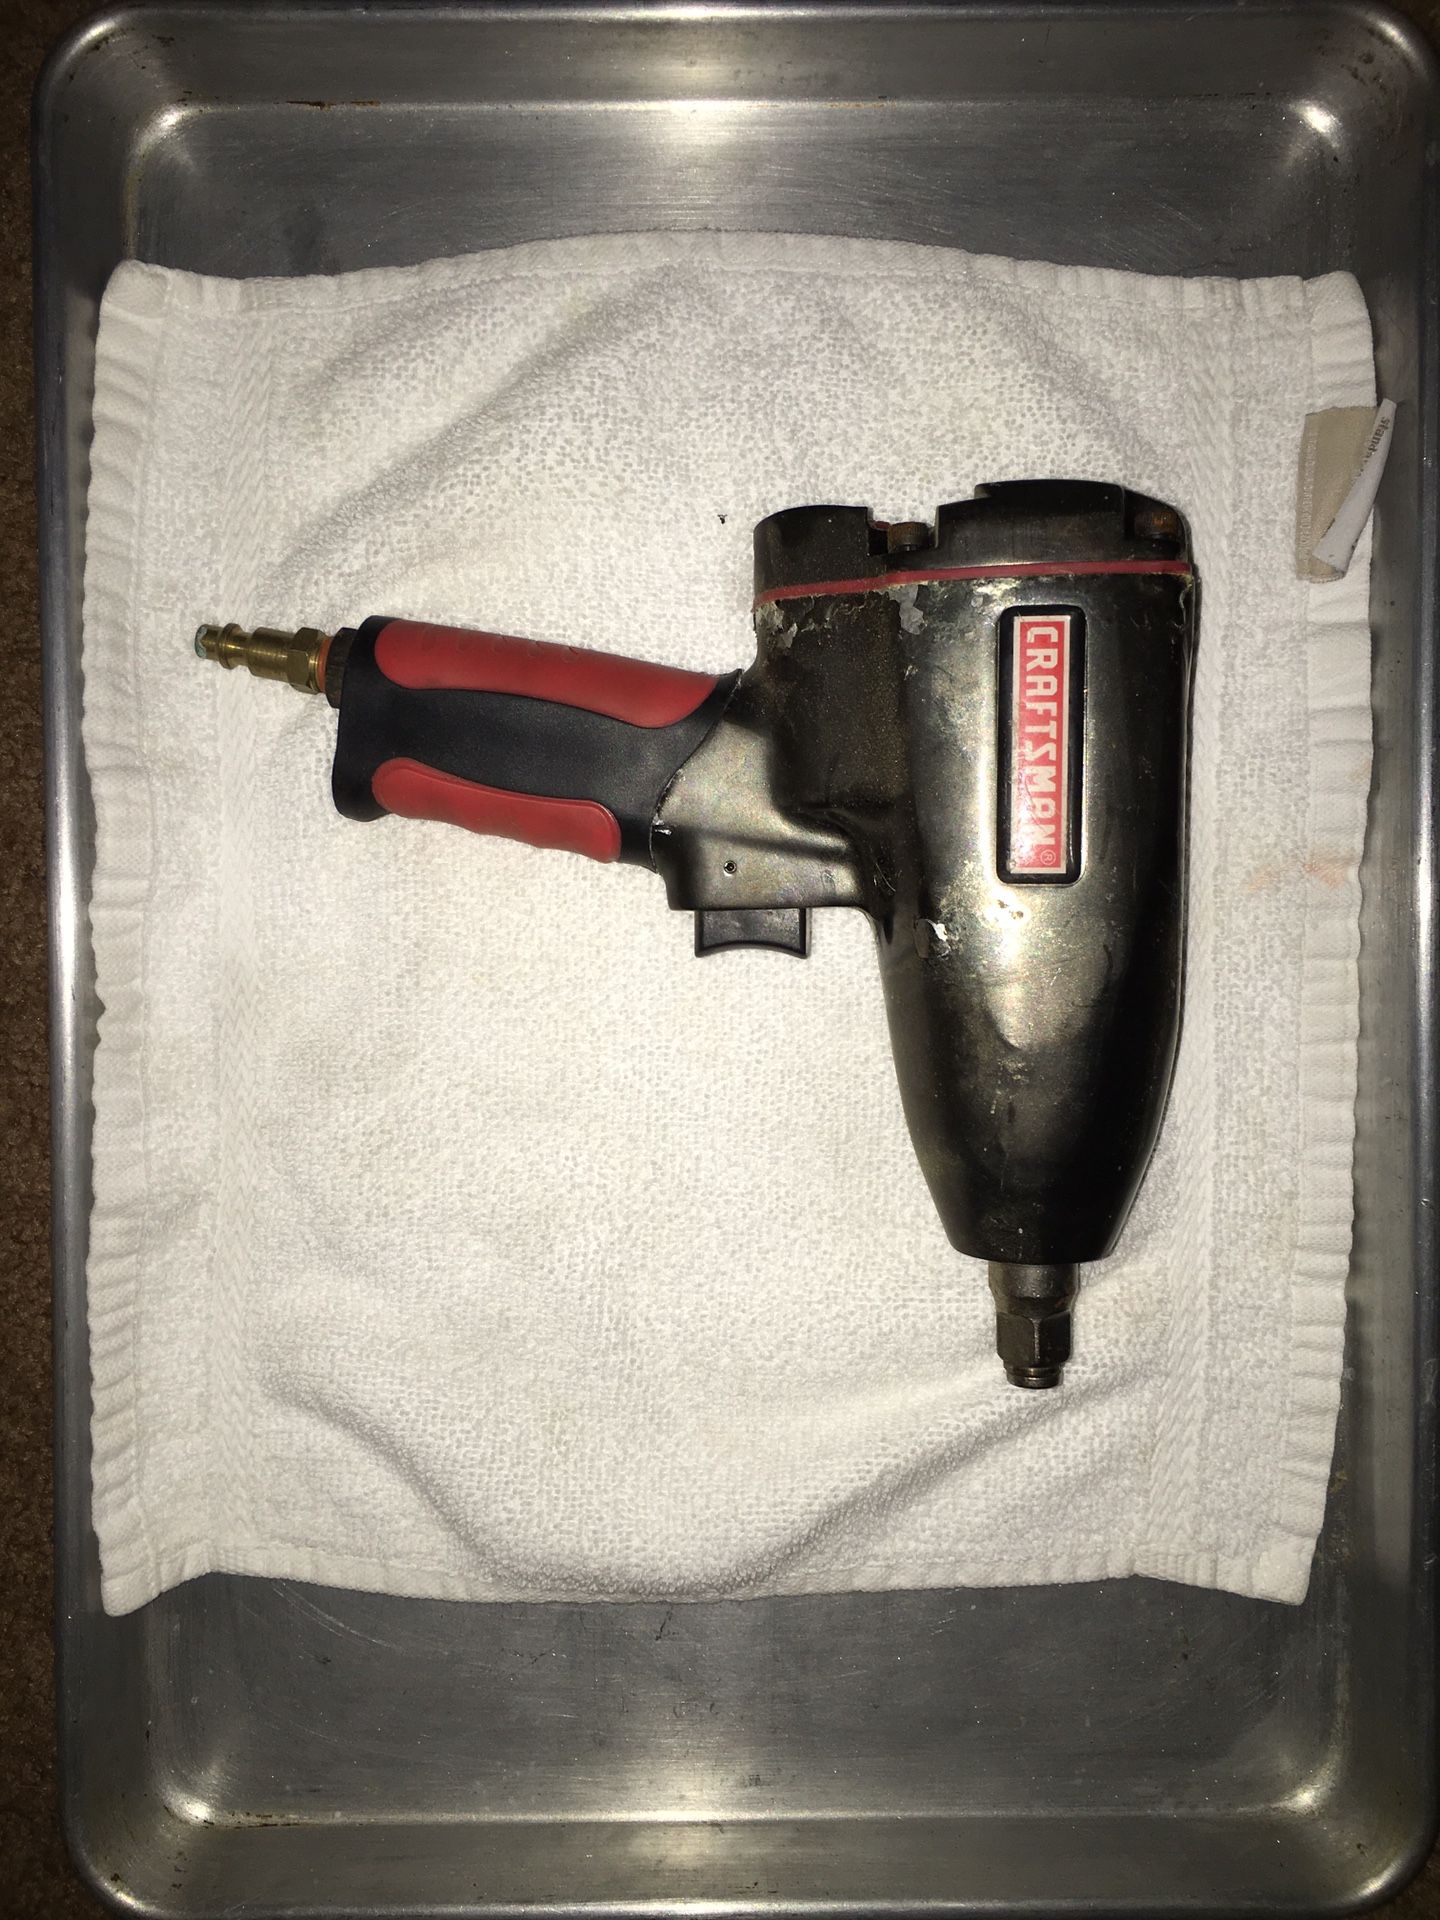 1/2” Impact Wrench